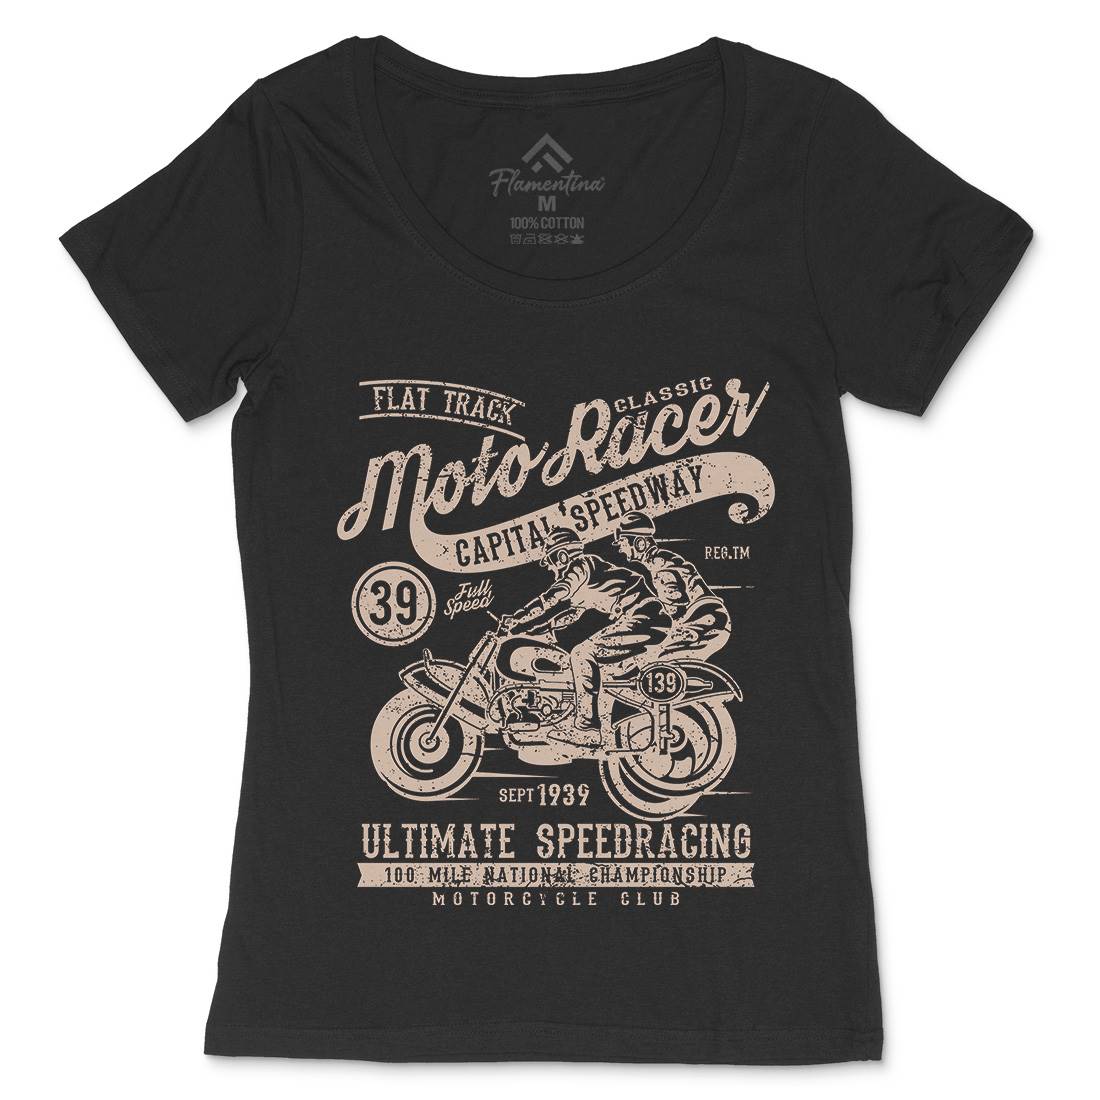 Moto Racer Womens Scoop Neck T-Shirt Motorcycles A090